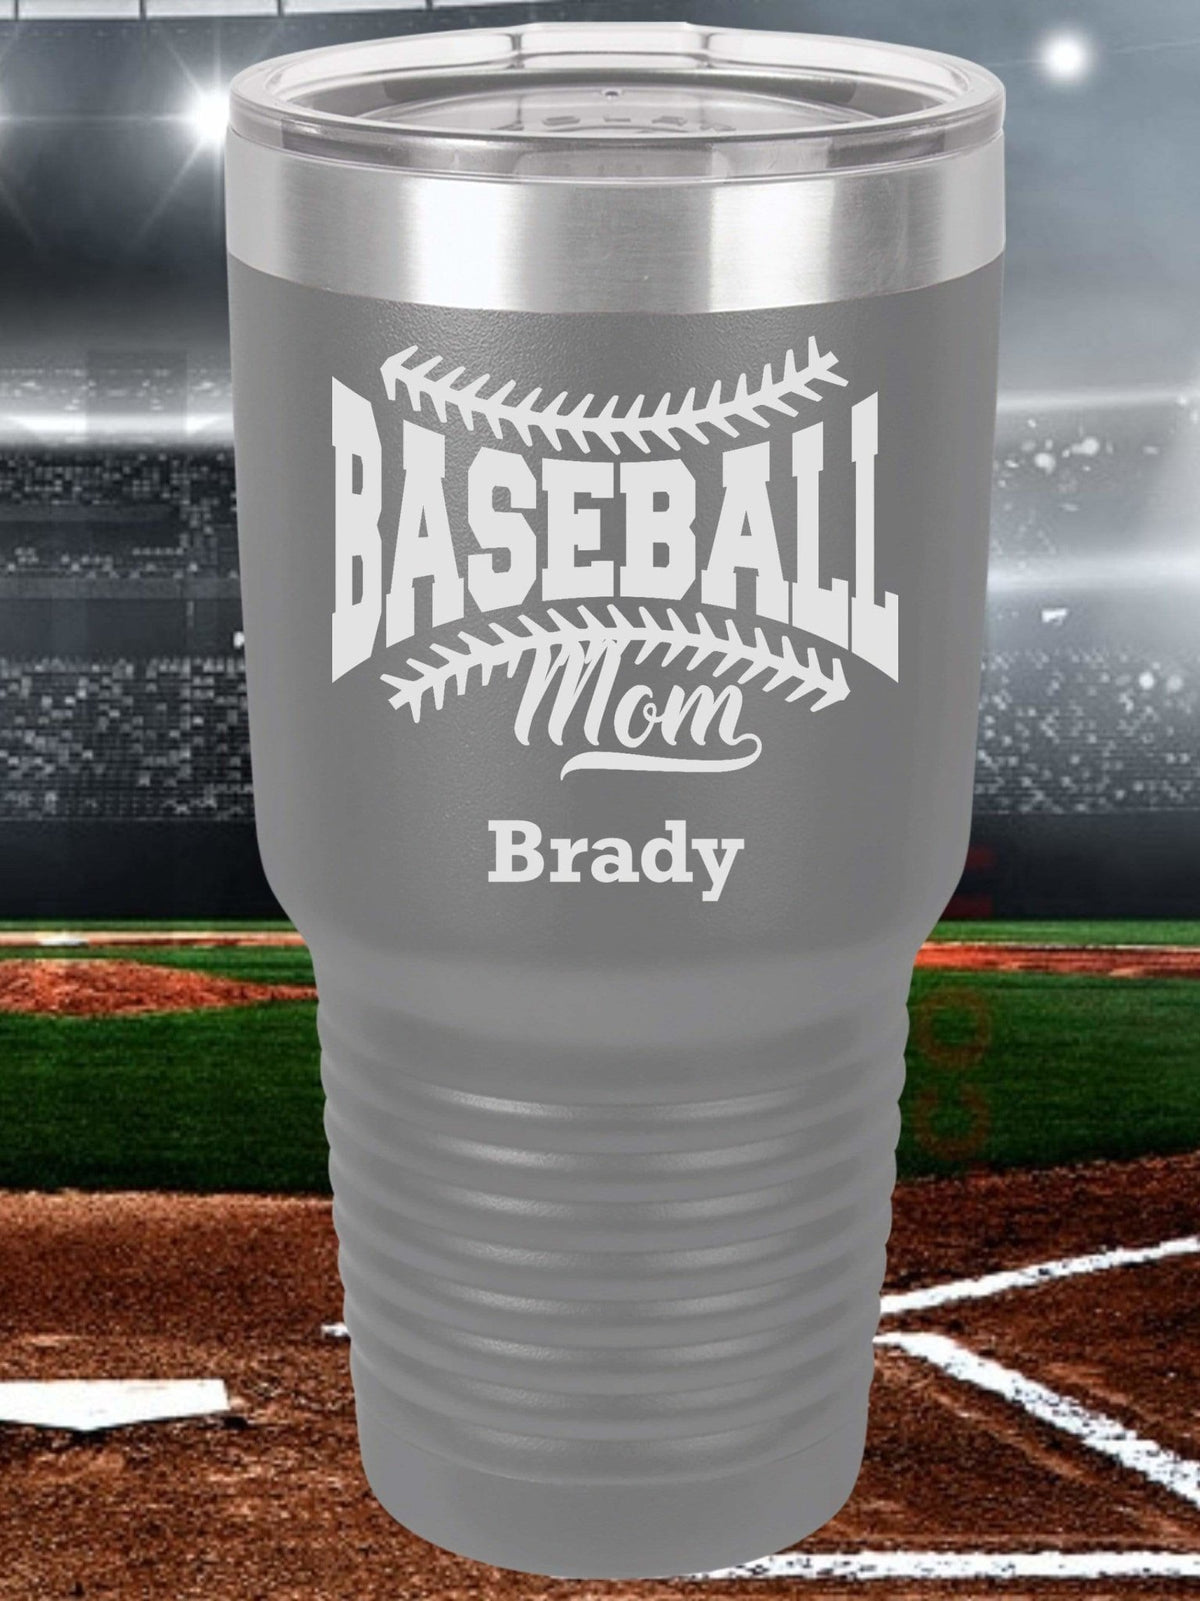 Baseball Mom 2 Personalized Tumbler by Griffco Supply